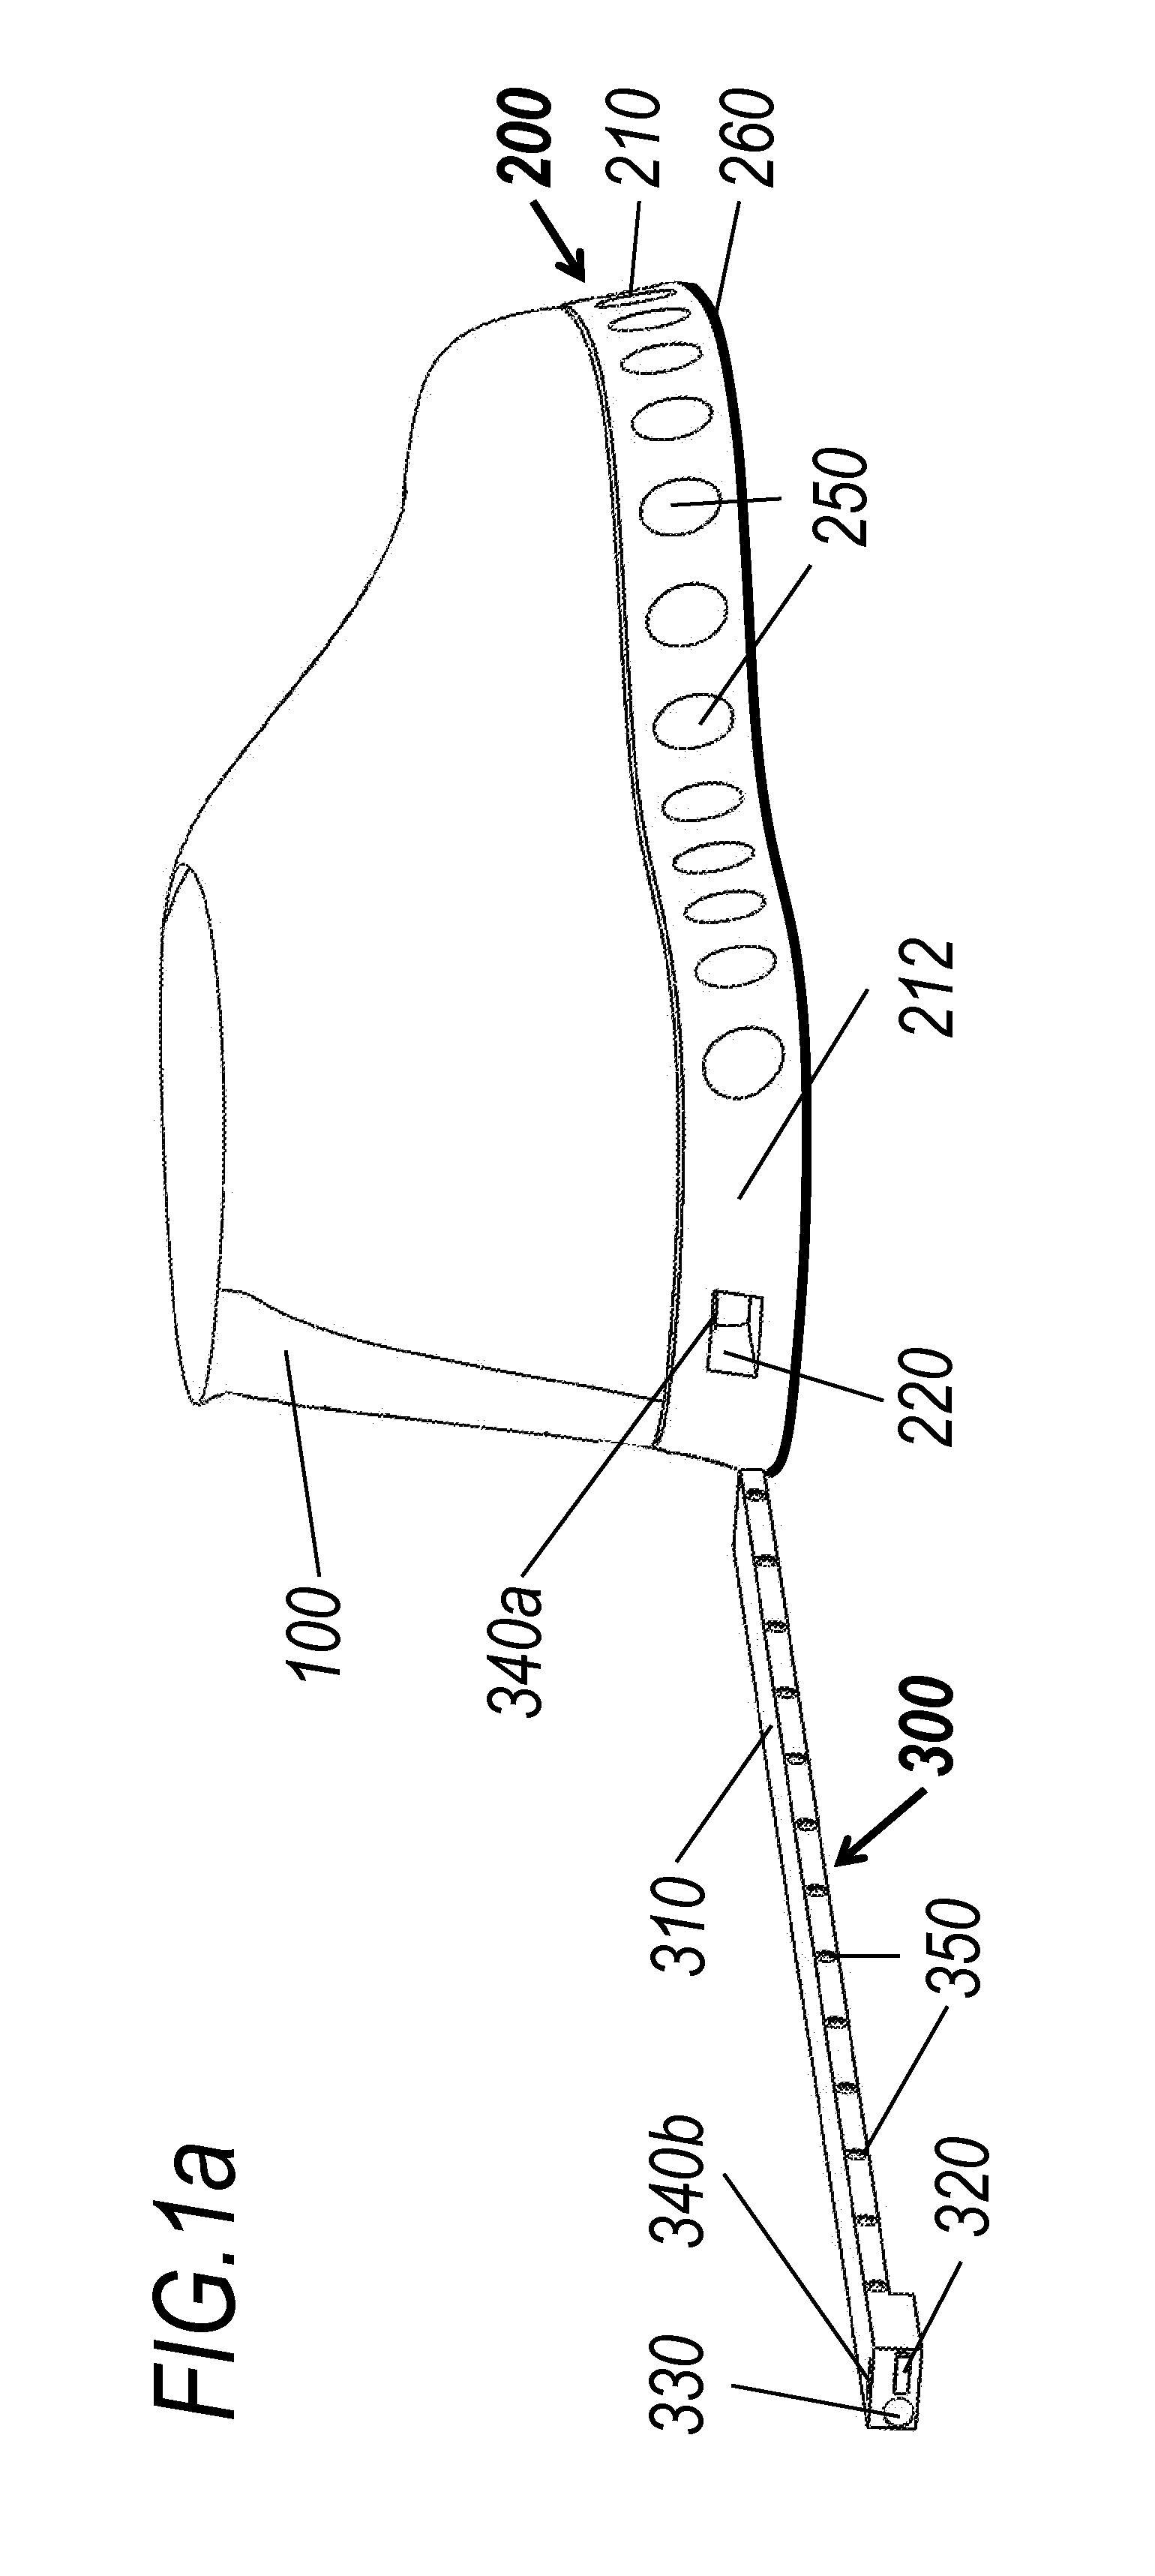 Footwear with Insertable Lighting Assembly